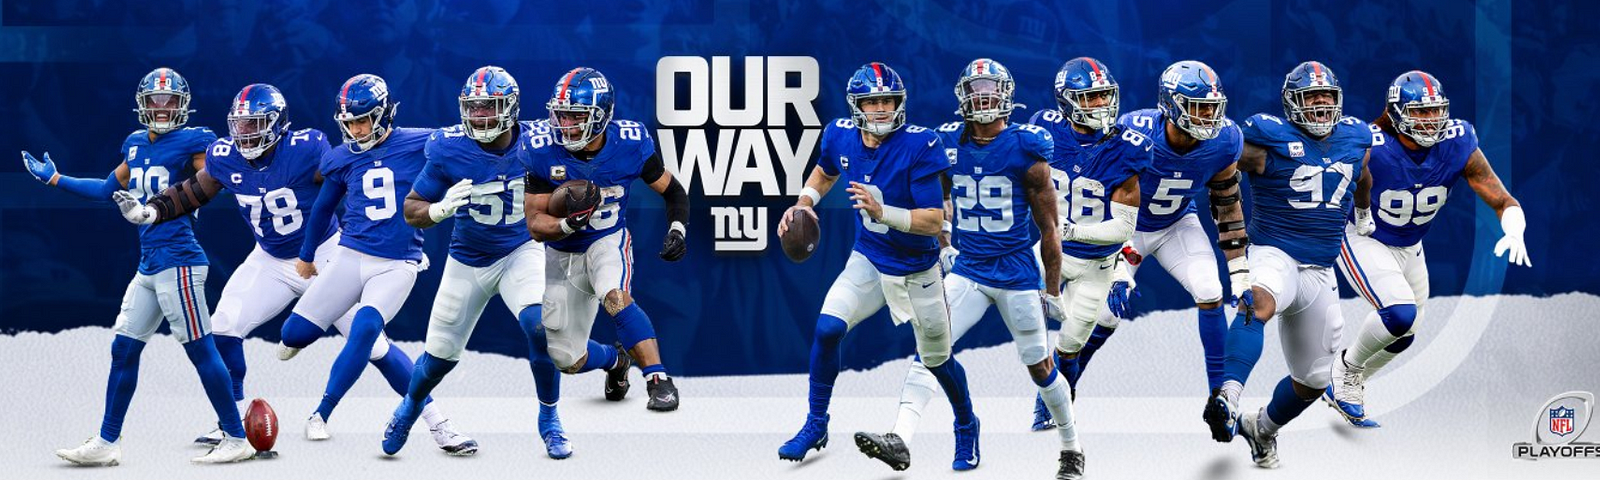 Banner featuring key Giants players and their playoff slogan “Our Way”